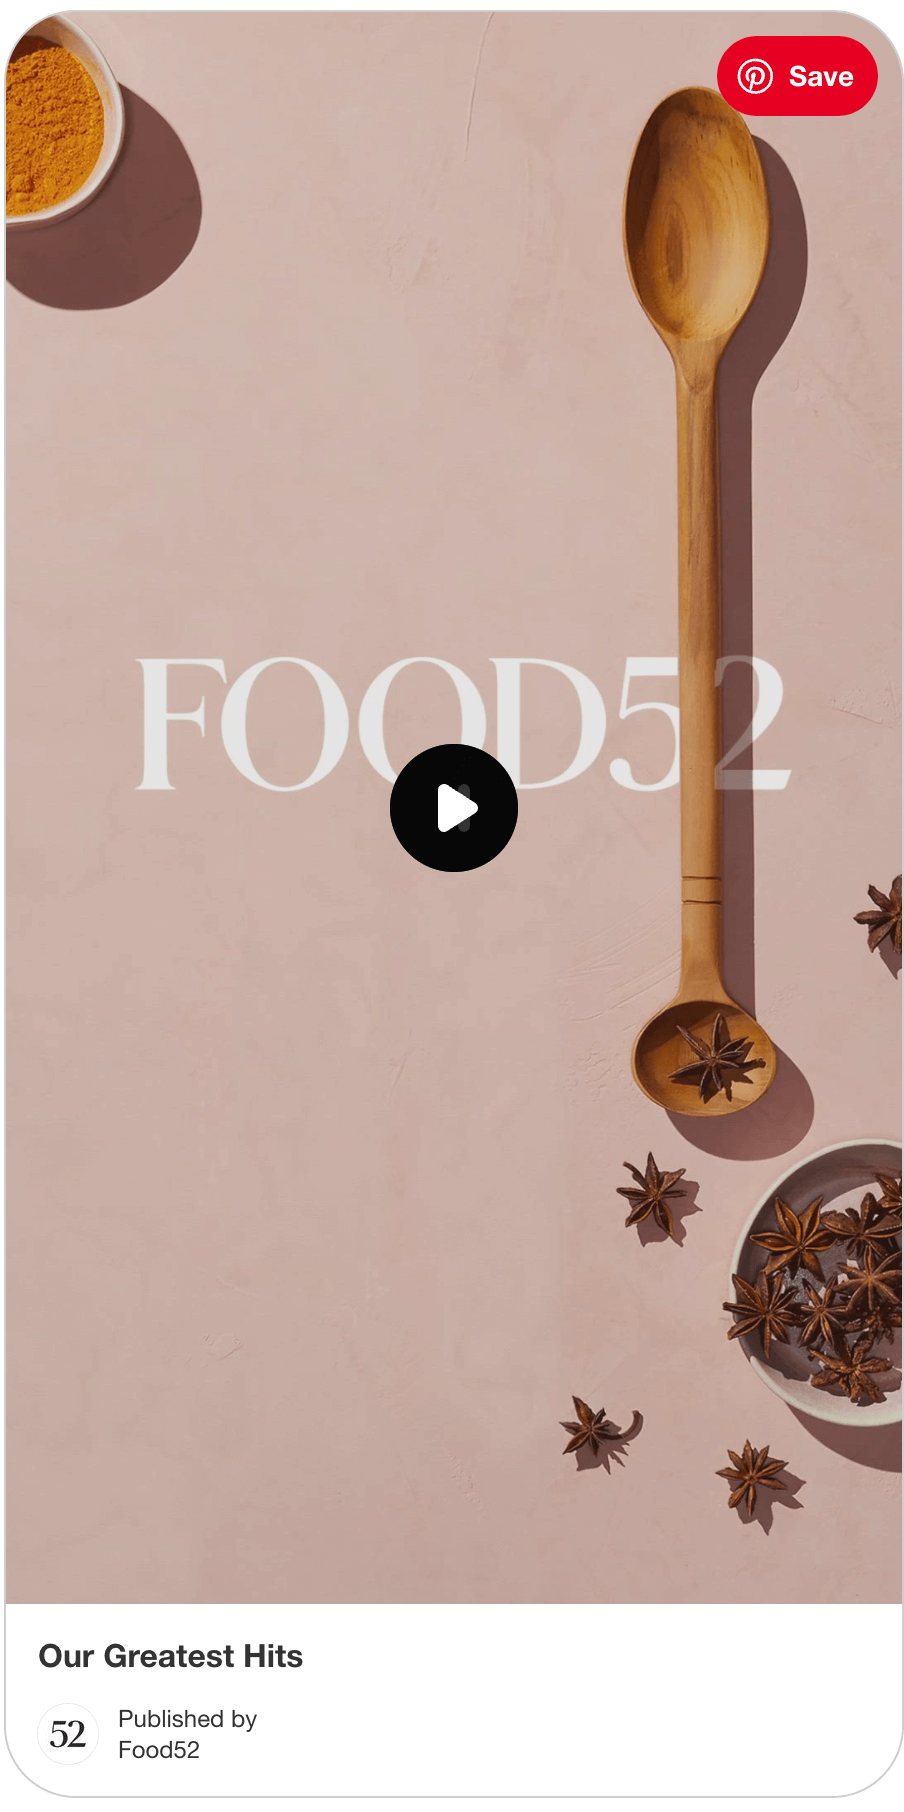 A Pinterest video ad from Food 52